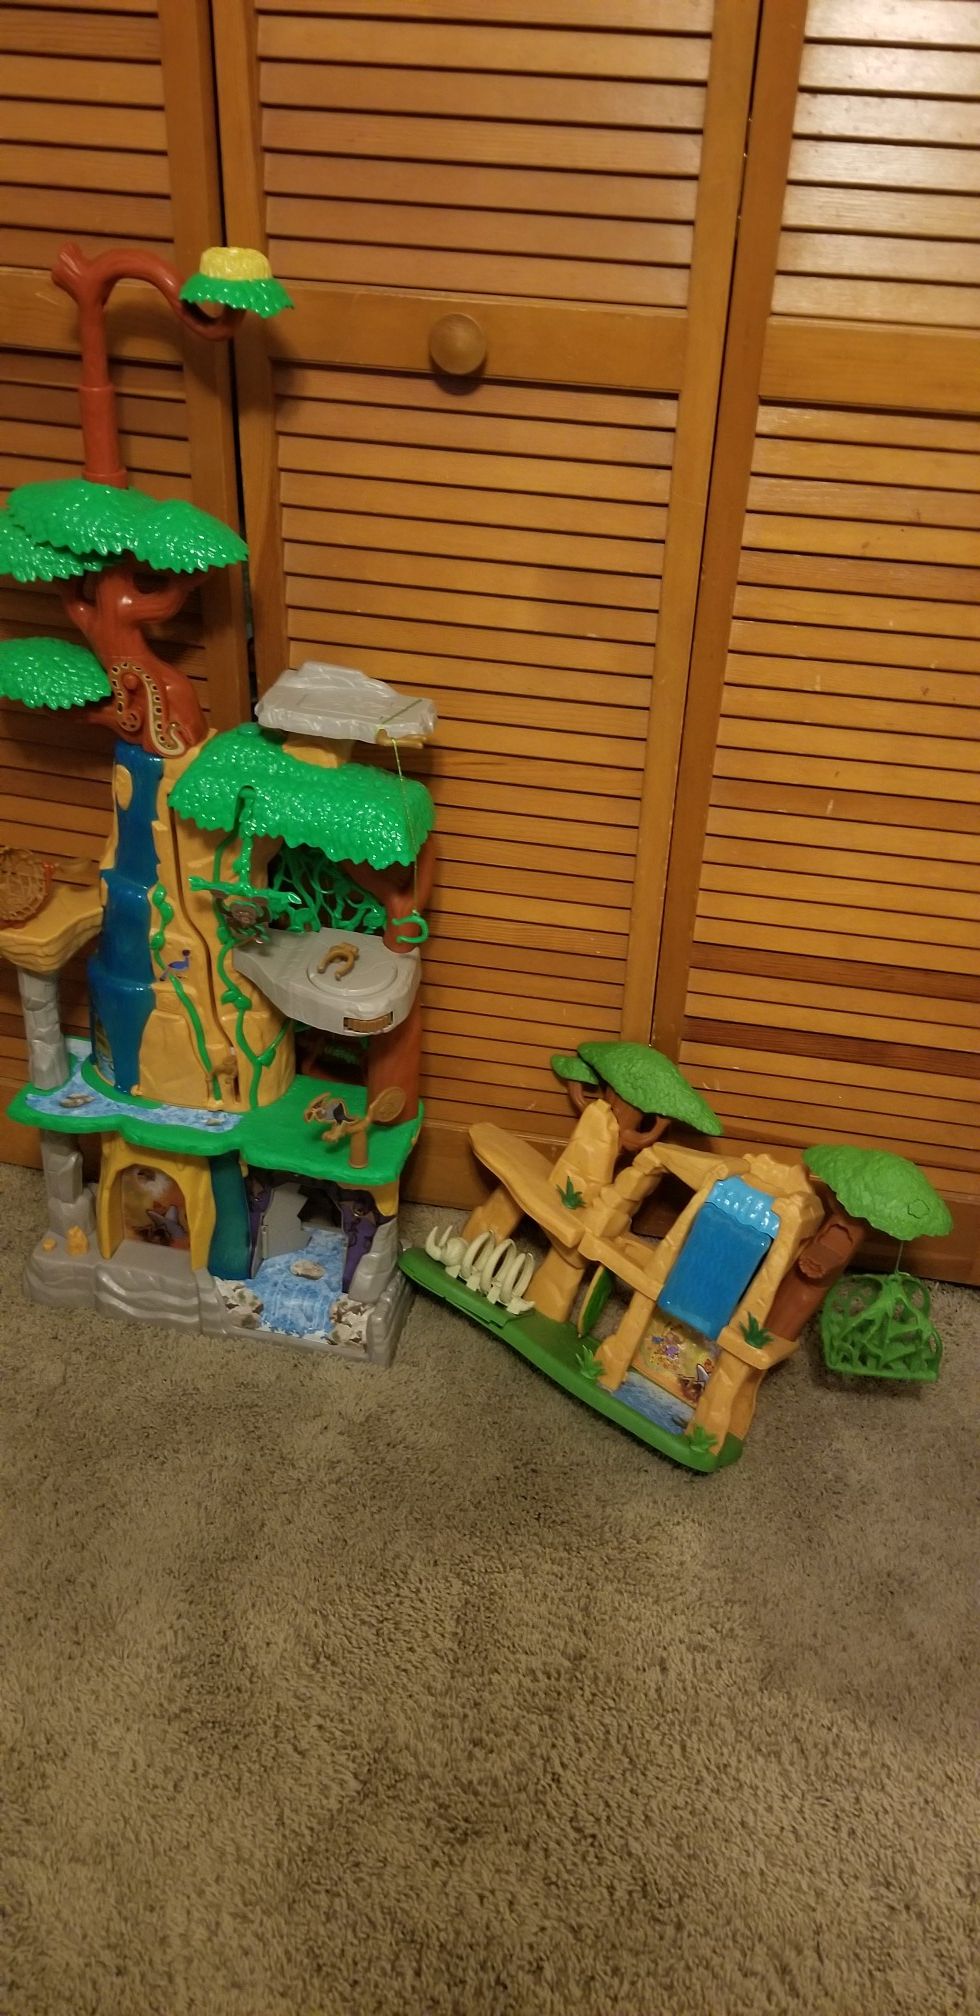 LionGuard playsets with animal figures.